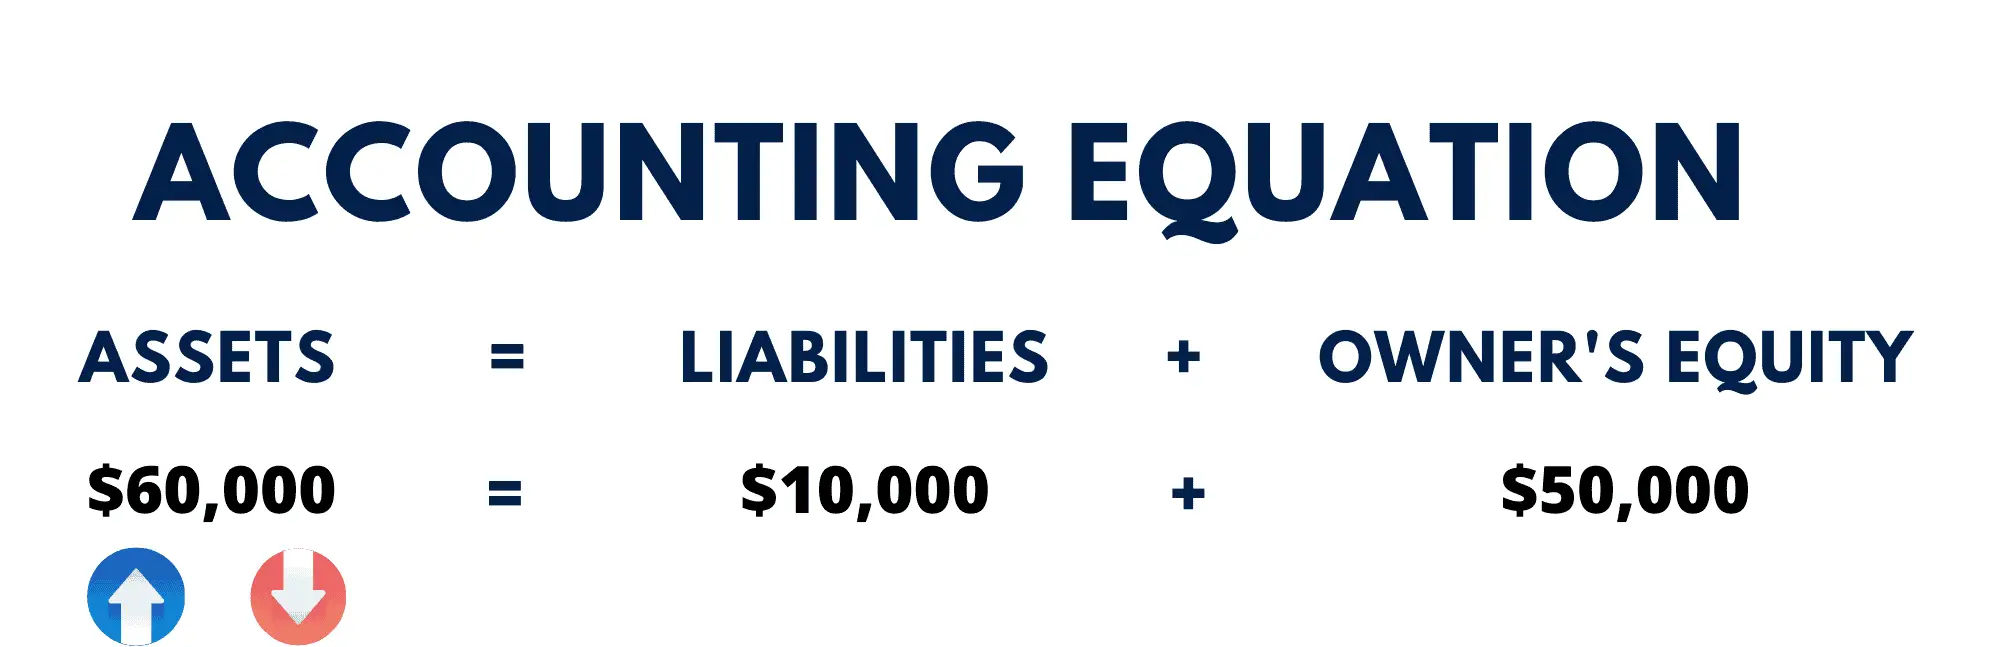 Assets ($60,000) = Liabilities ($10,000) + Equity($50,000)